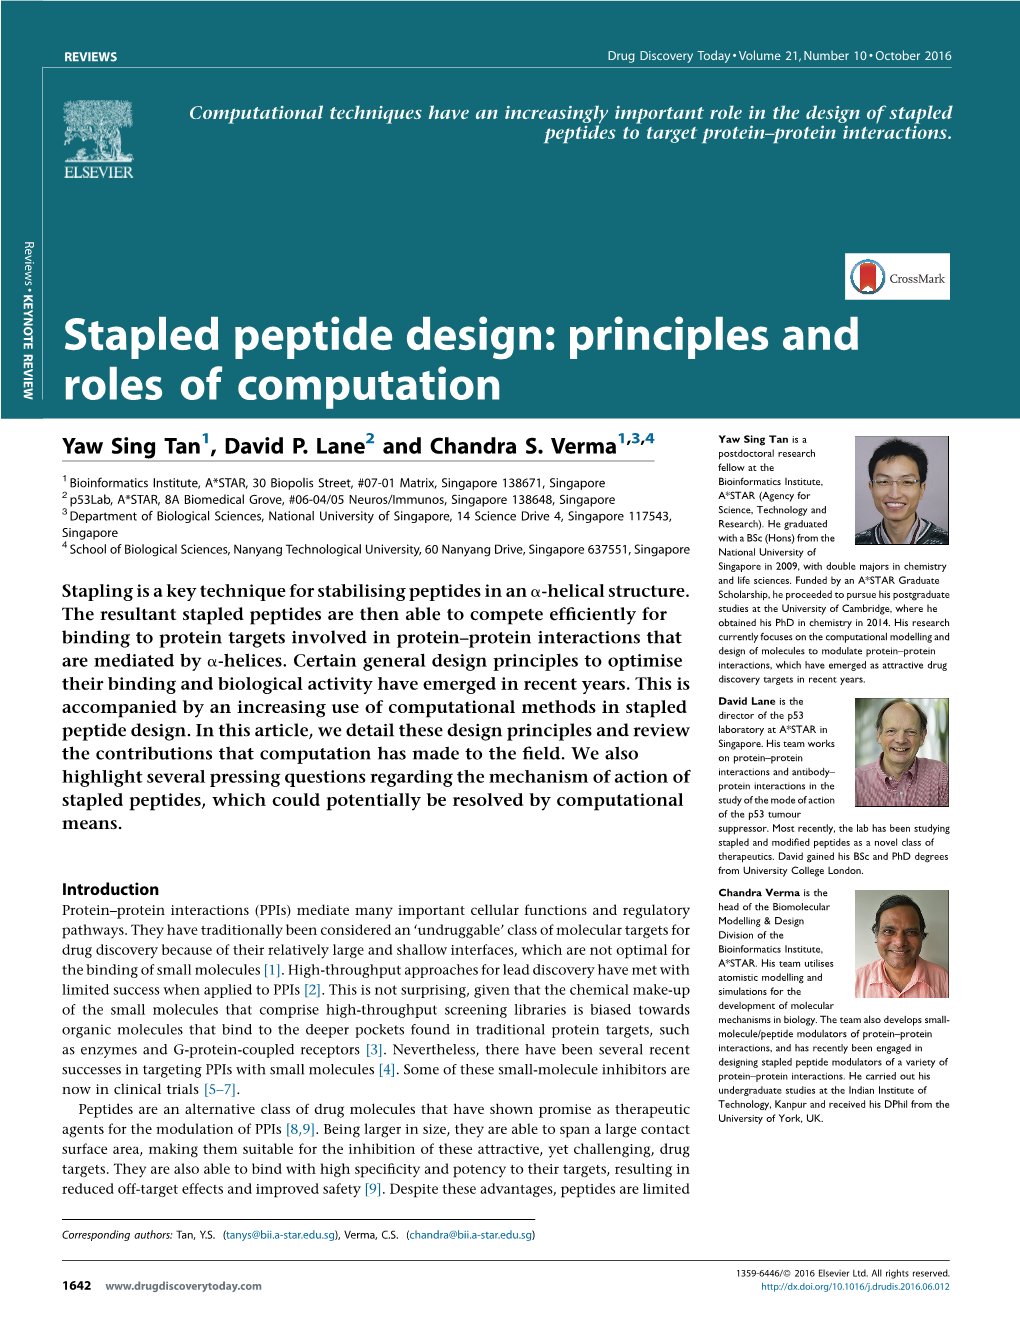 Stapled Peptide Design: Principles and Roles of Computation